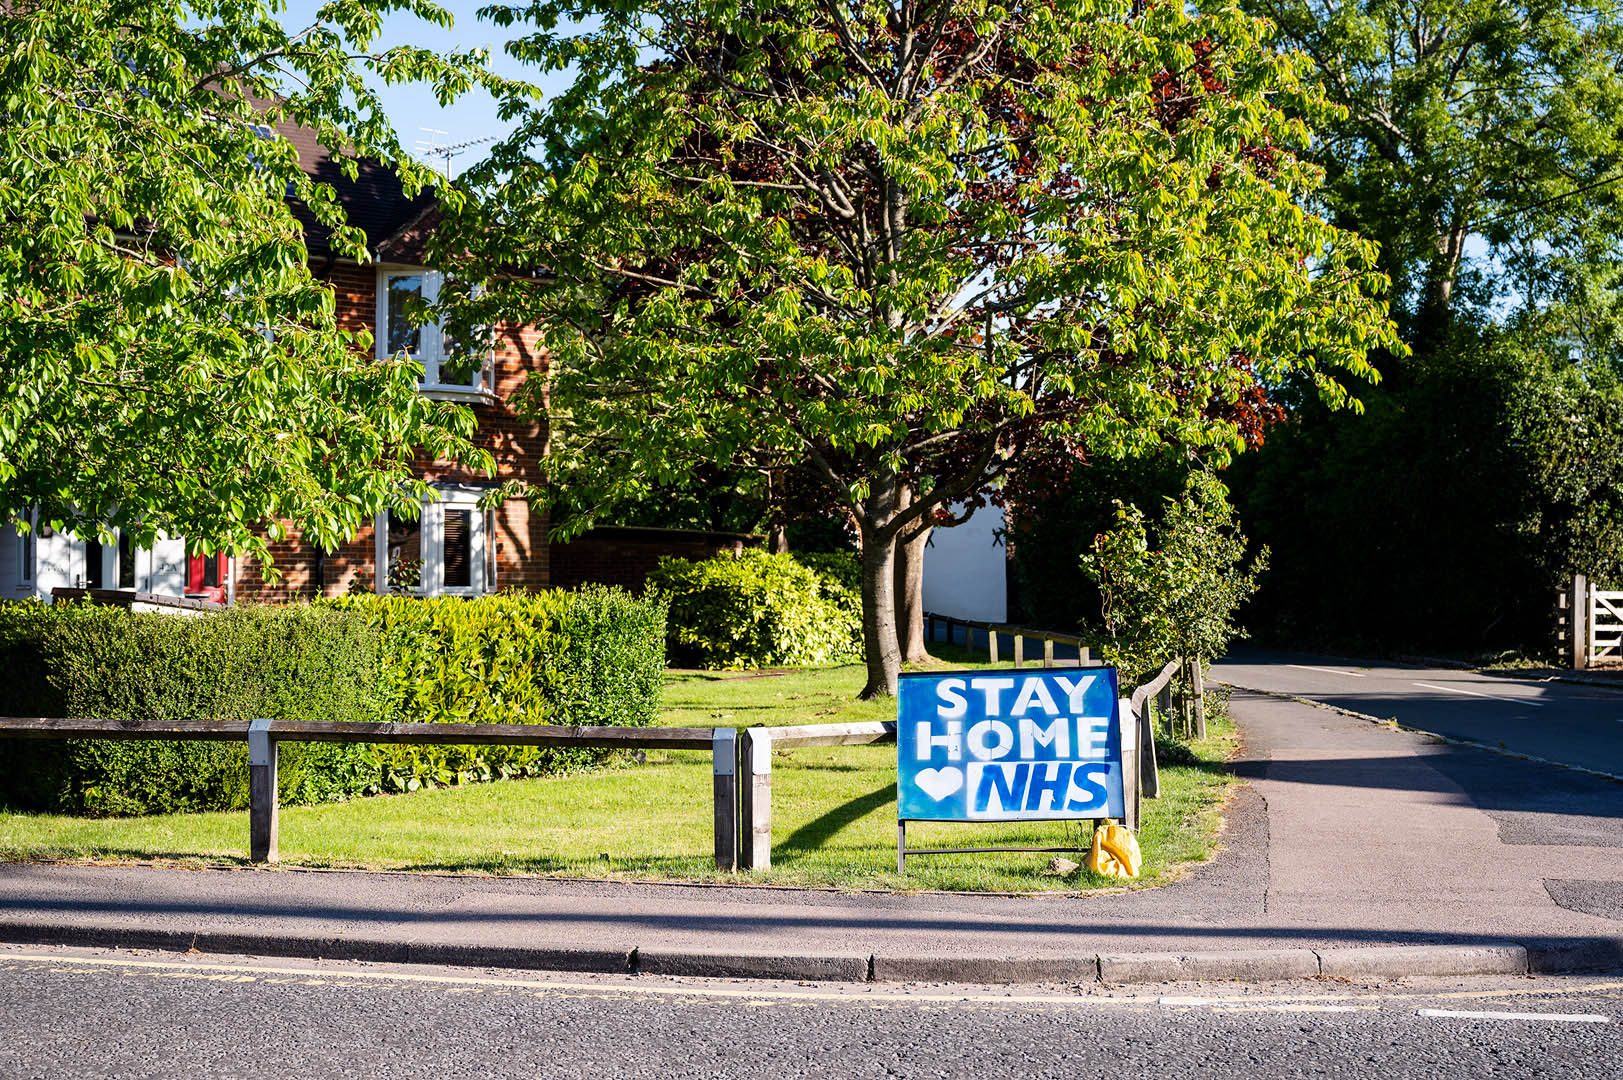 Stay at home for NHS sign on street corner